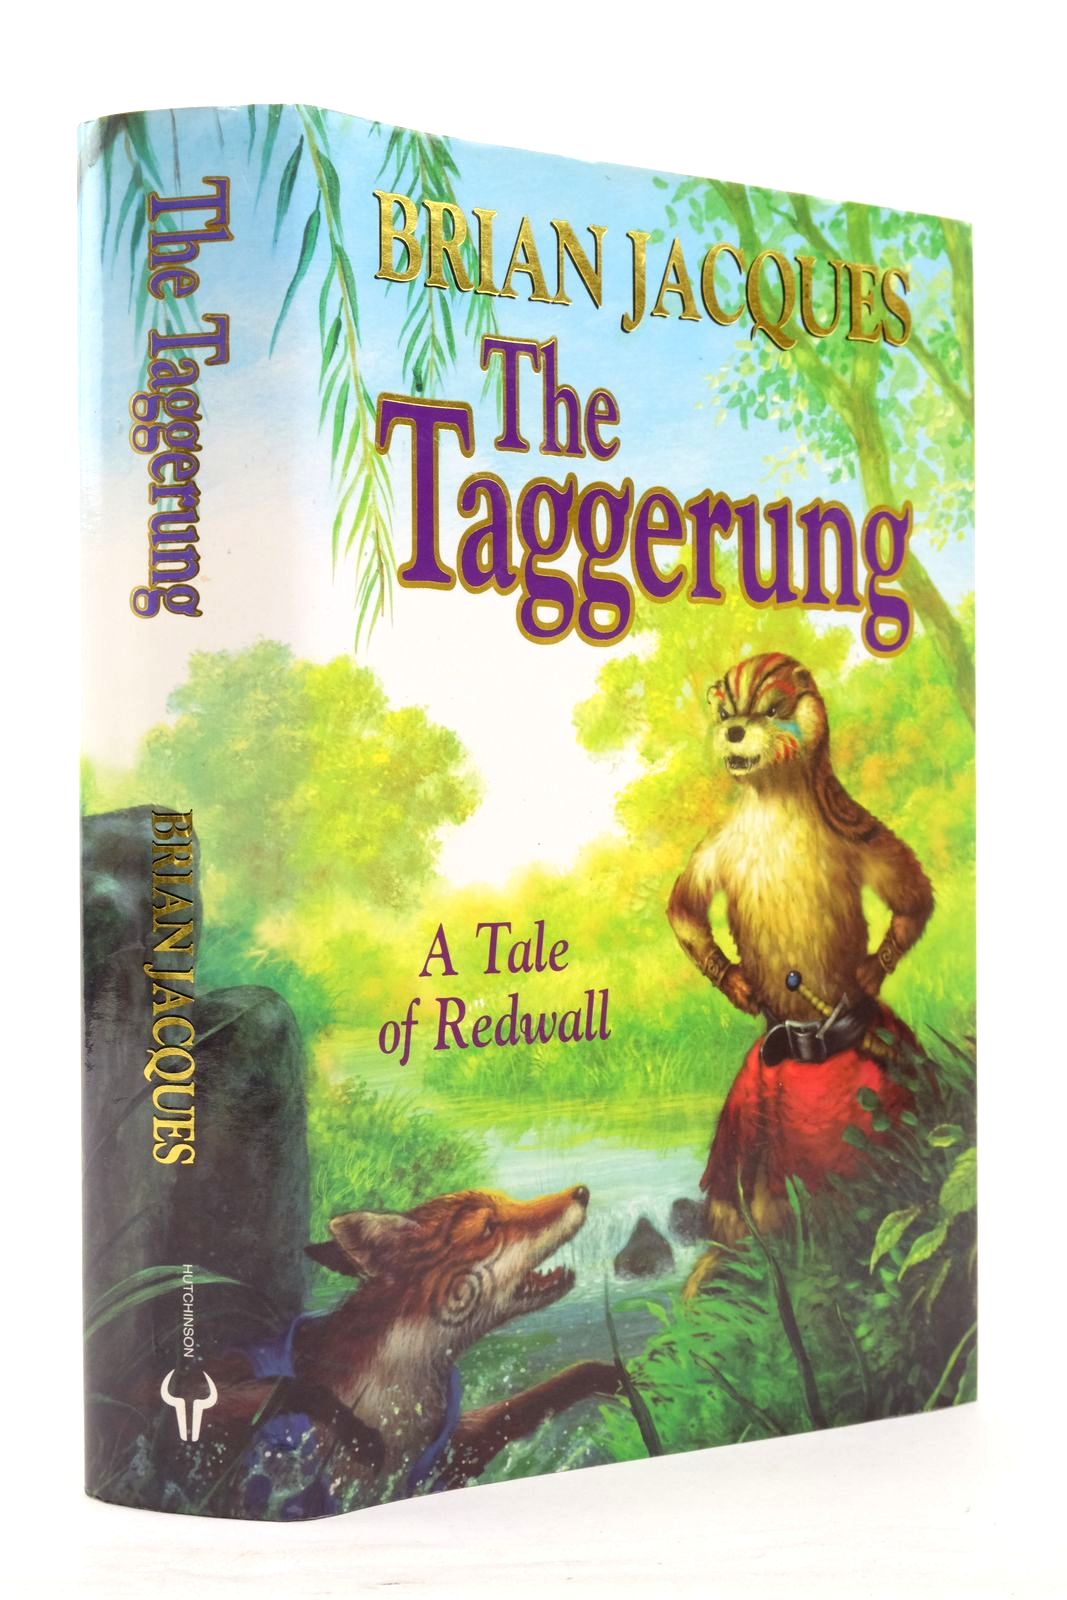 Photo of THE TAGGERUNG written by Jacques, Brian illustrated by Standley, Peter published by Hutchinson (STOCK CODE: 2137935)  for sale by Stella & Rose's Books